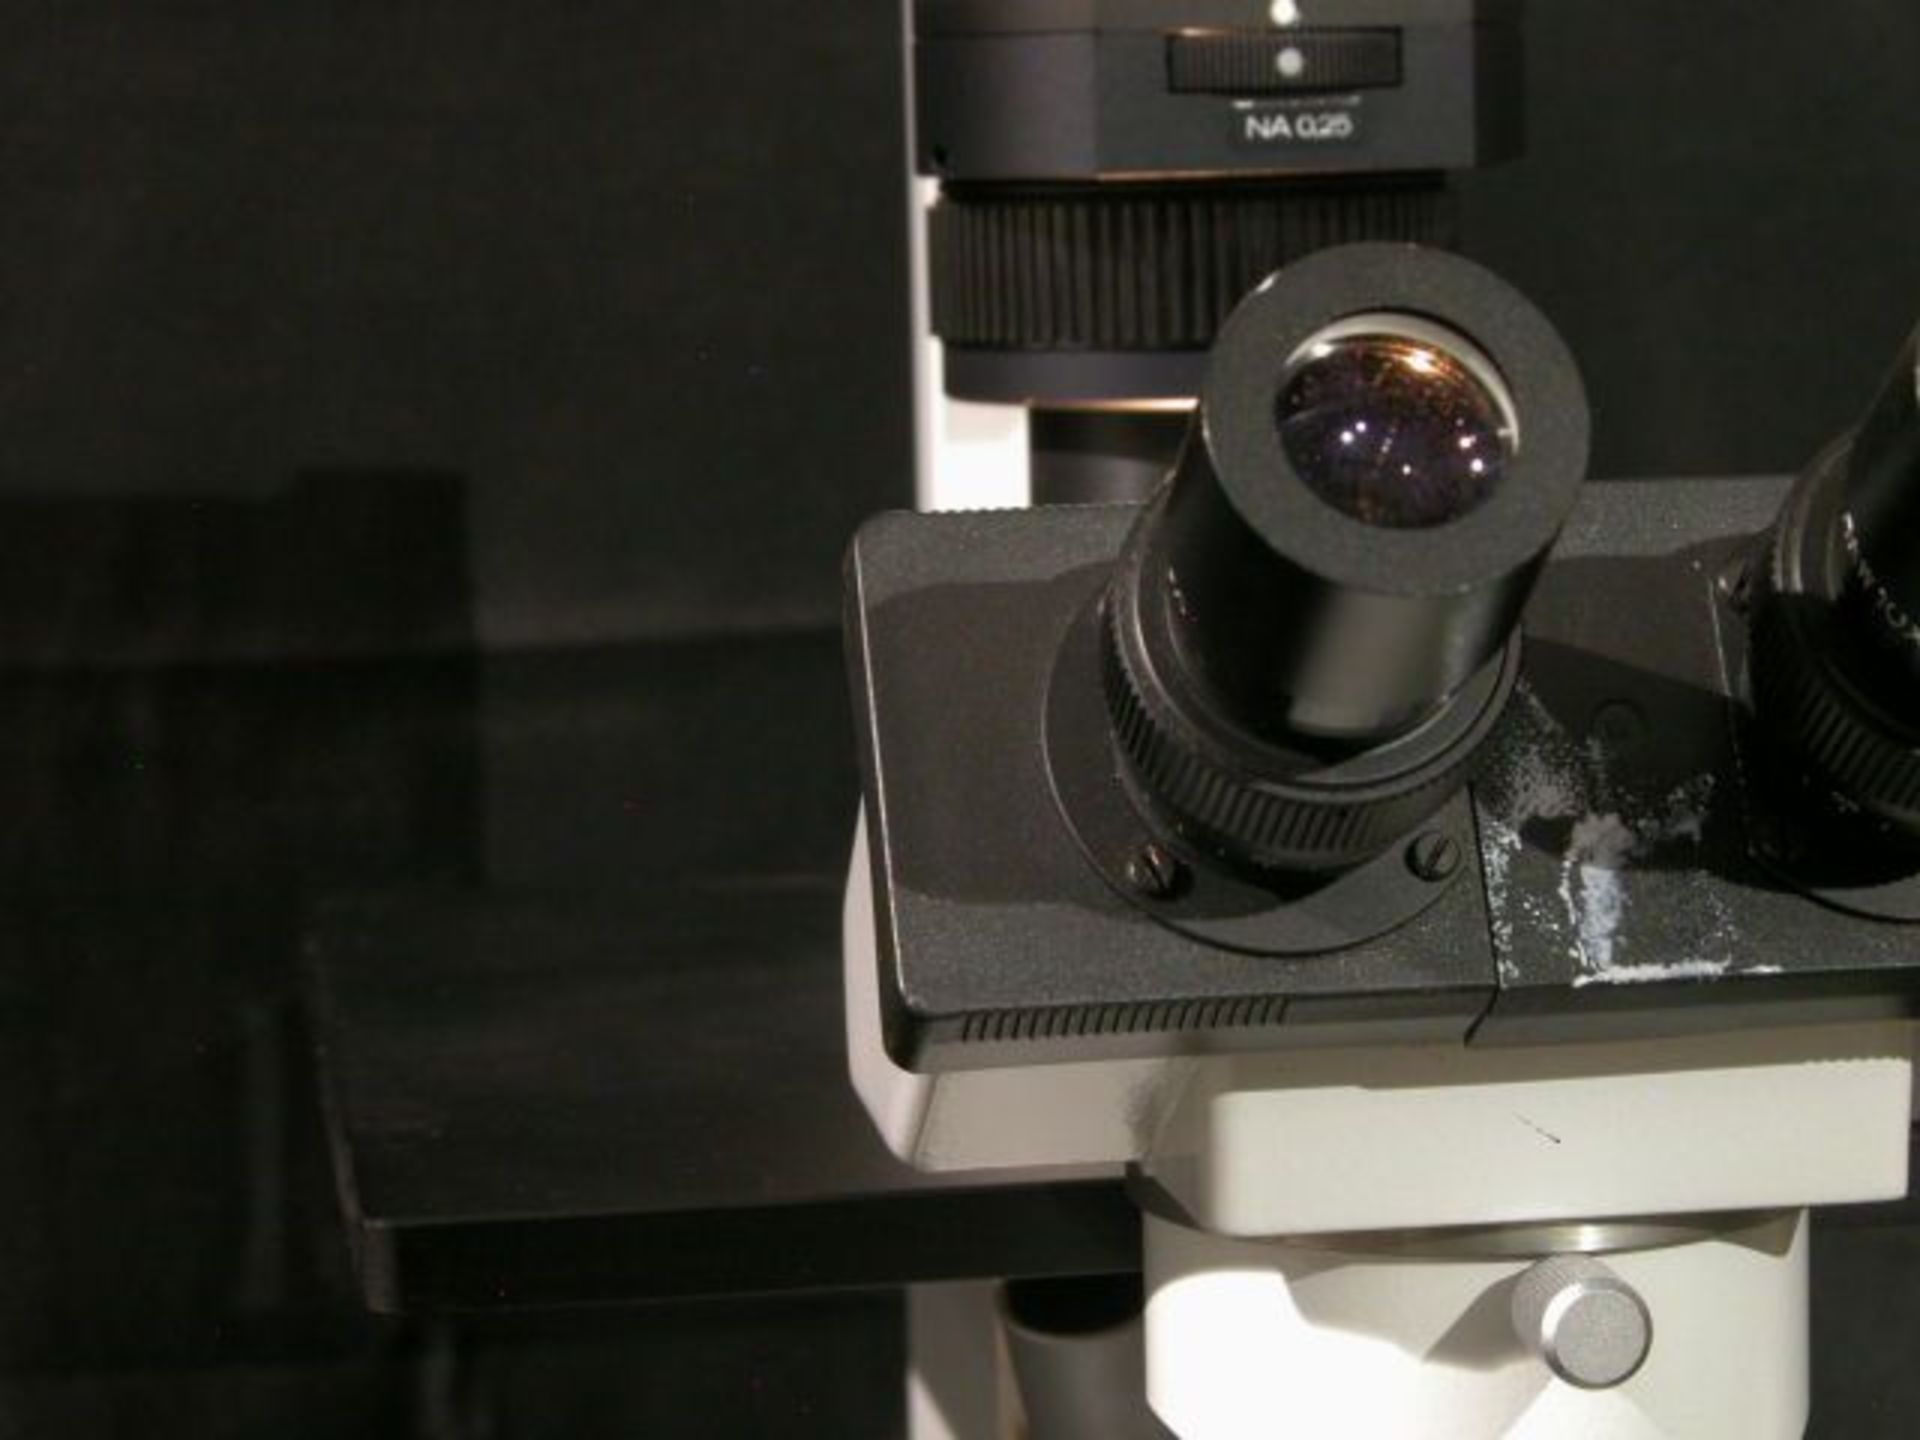 Hund Wetzlar Wilovert A Inverted Microscope 2 Ocular 3 Objectives, Qty 1, 330800442517 - Image 3 of 16